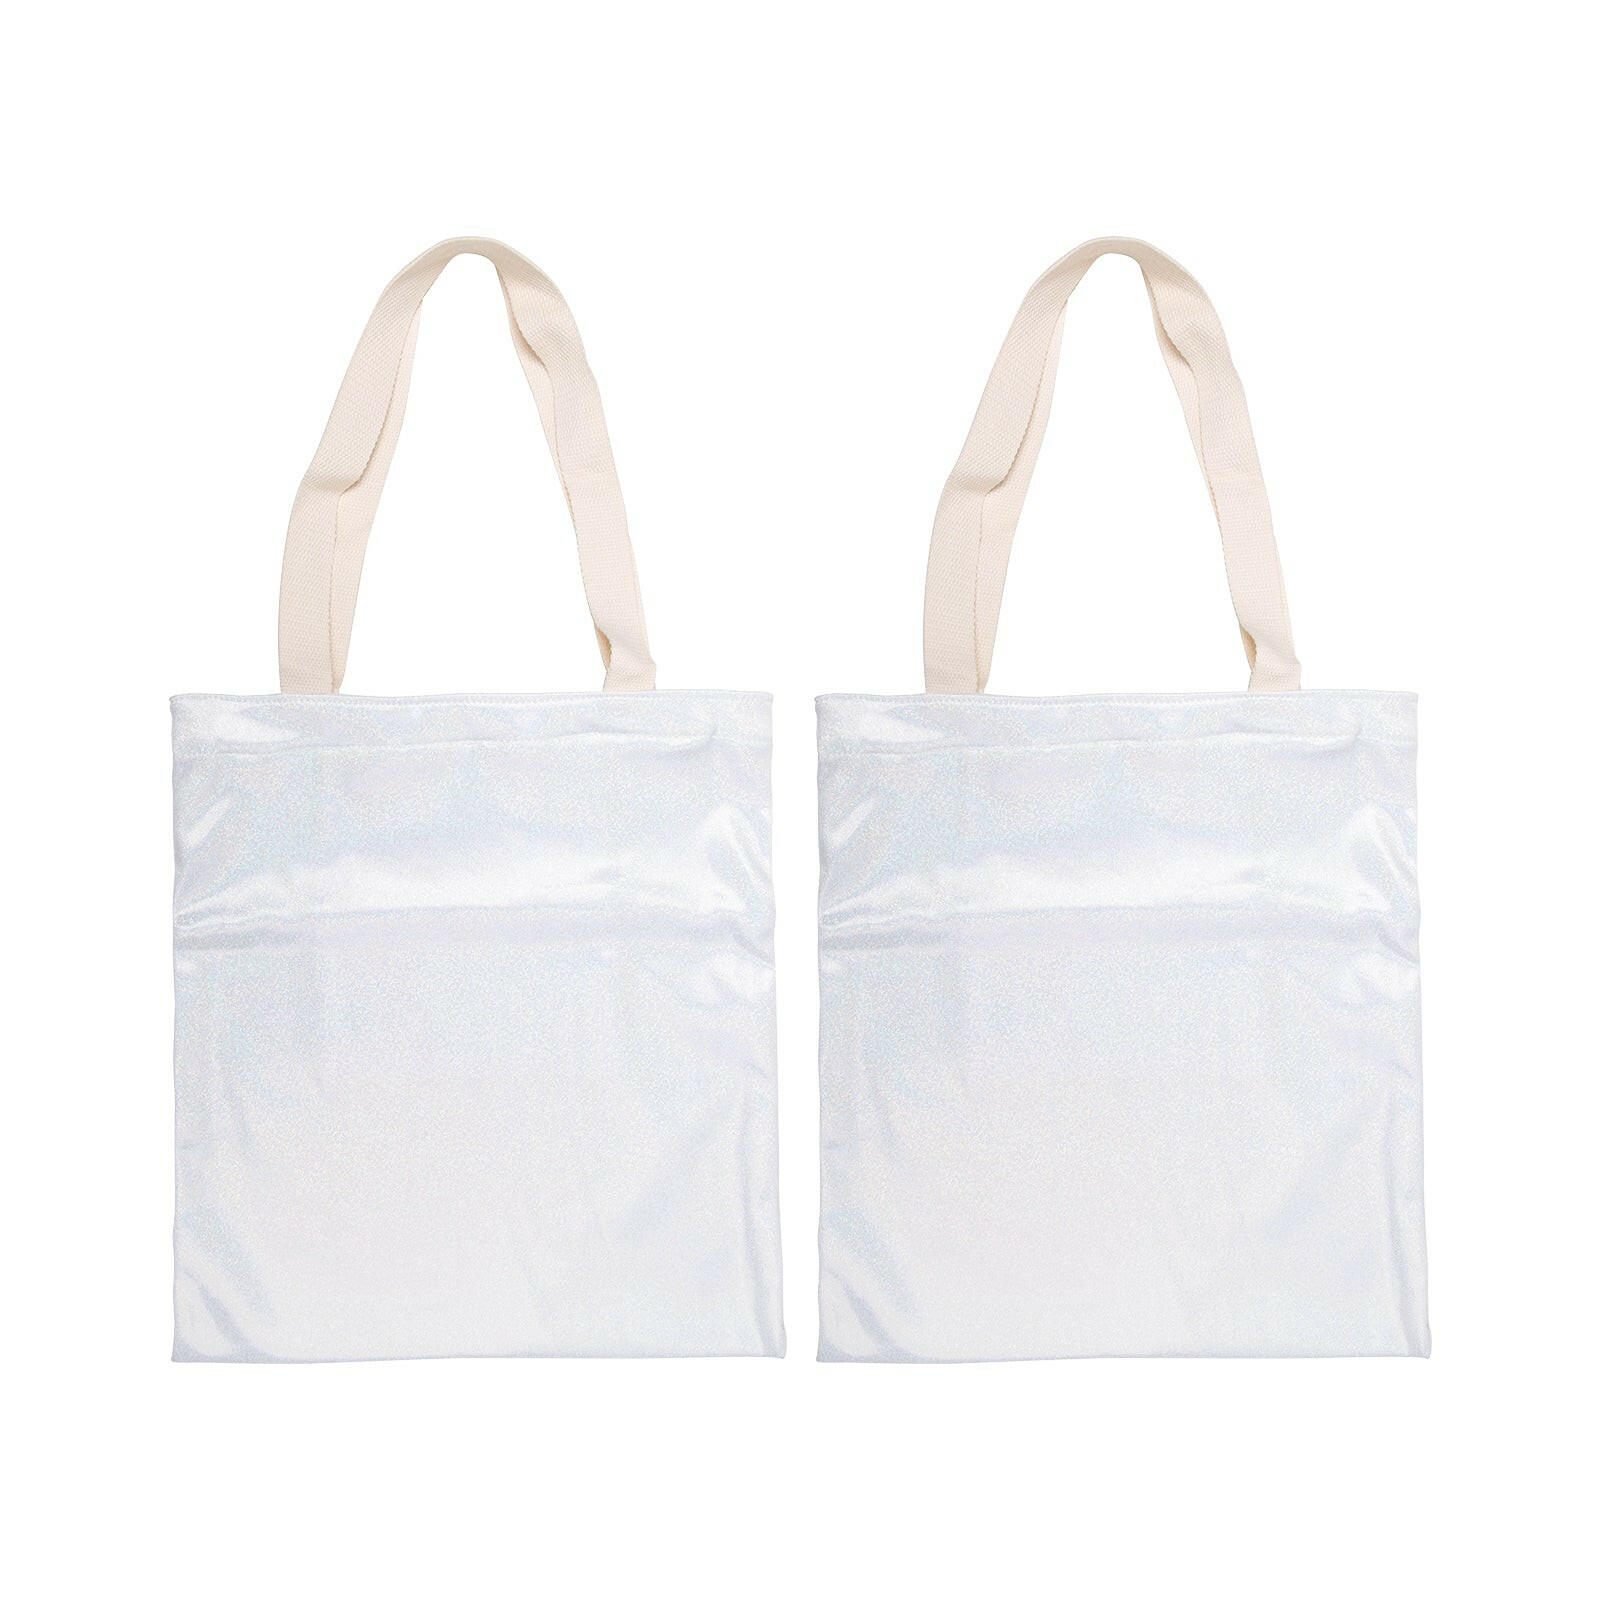 Glitter Sublimation Tote Bags - 2 Pack.